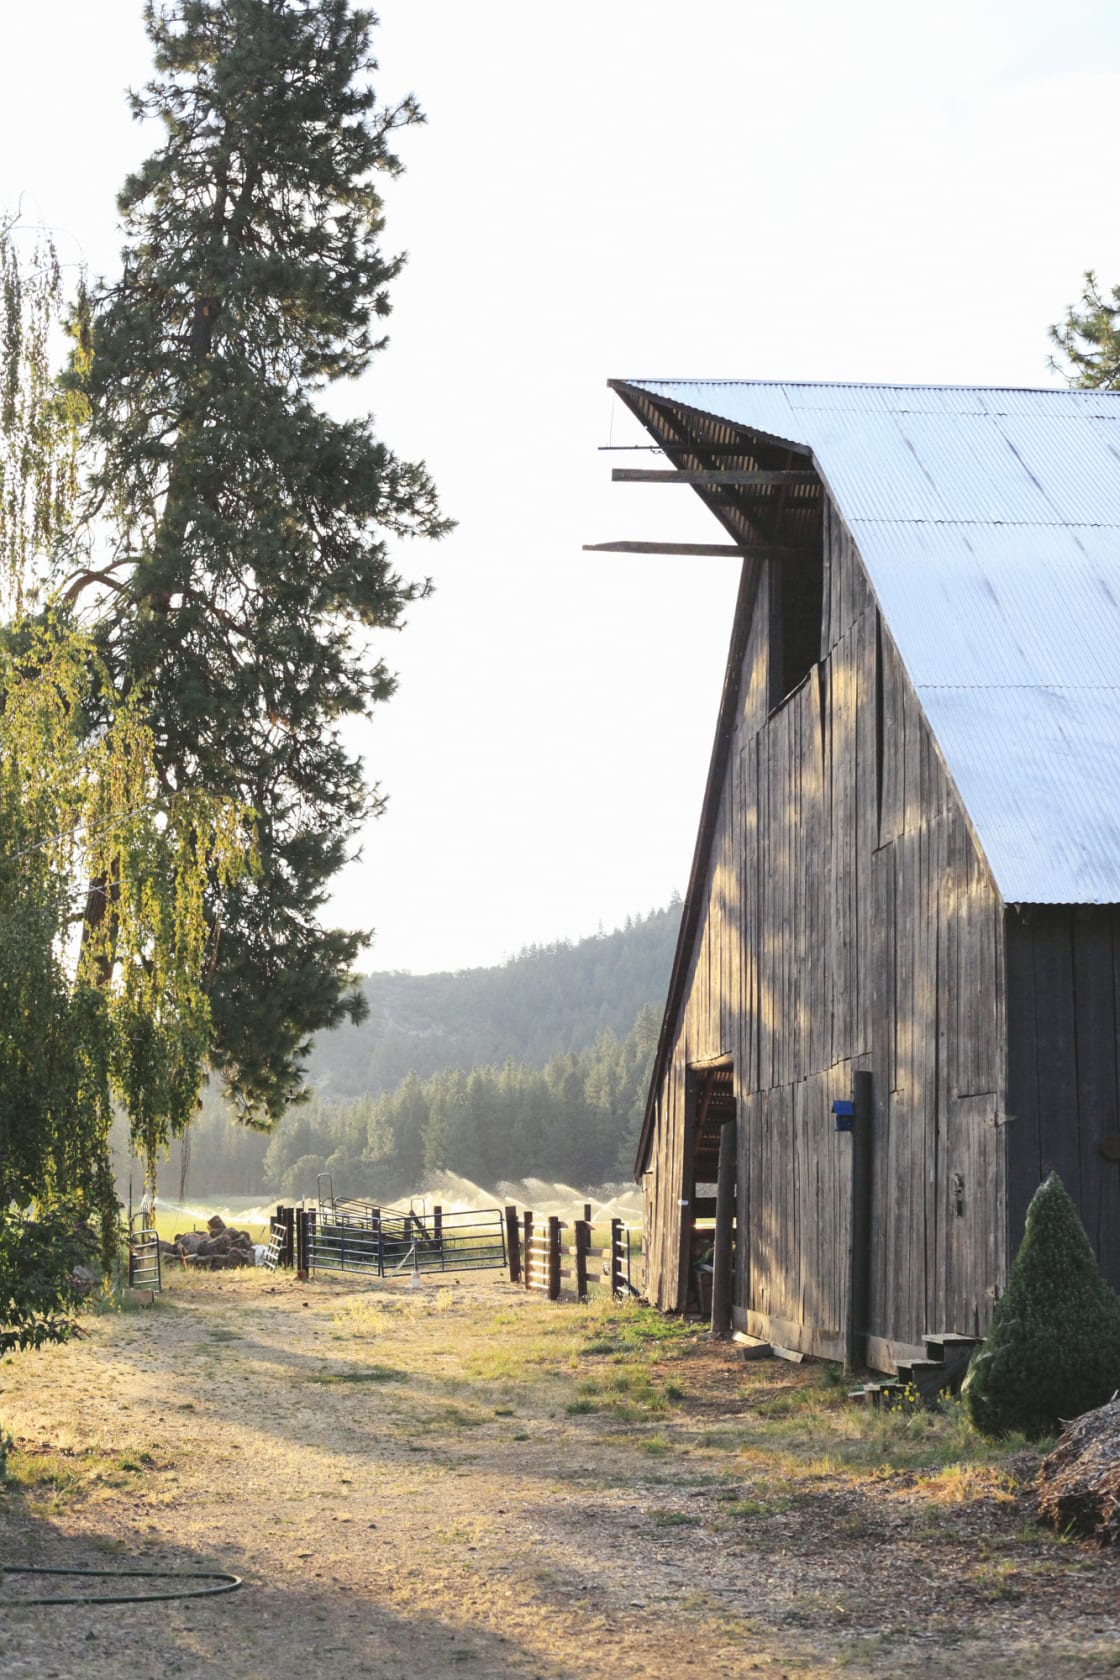 The old Ranch barn in the morning light takes you back in time.